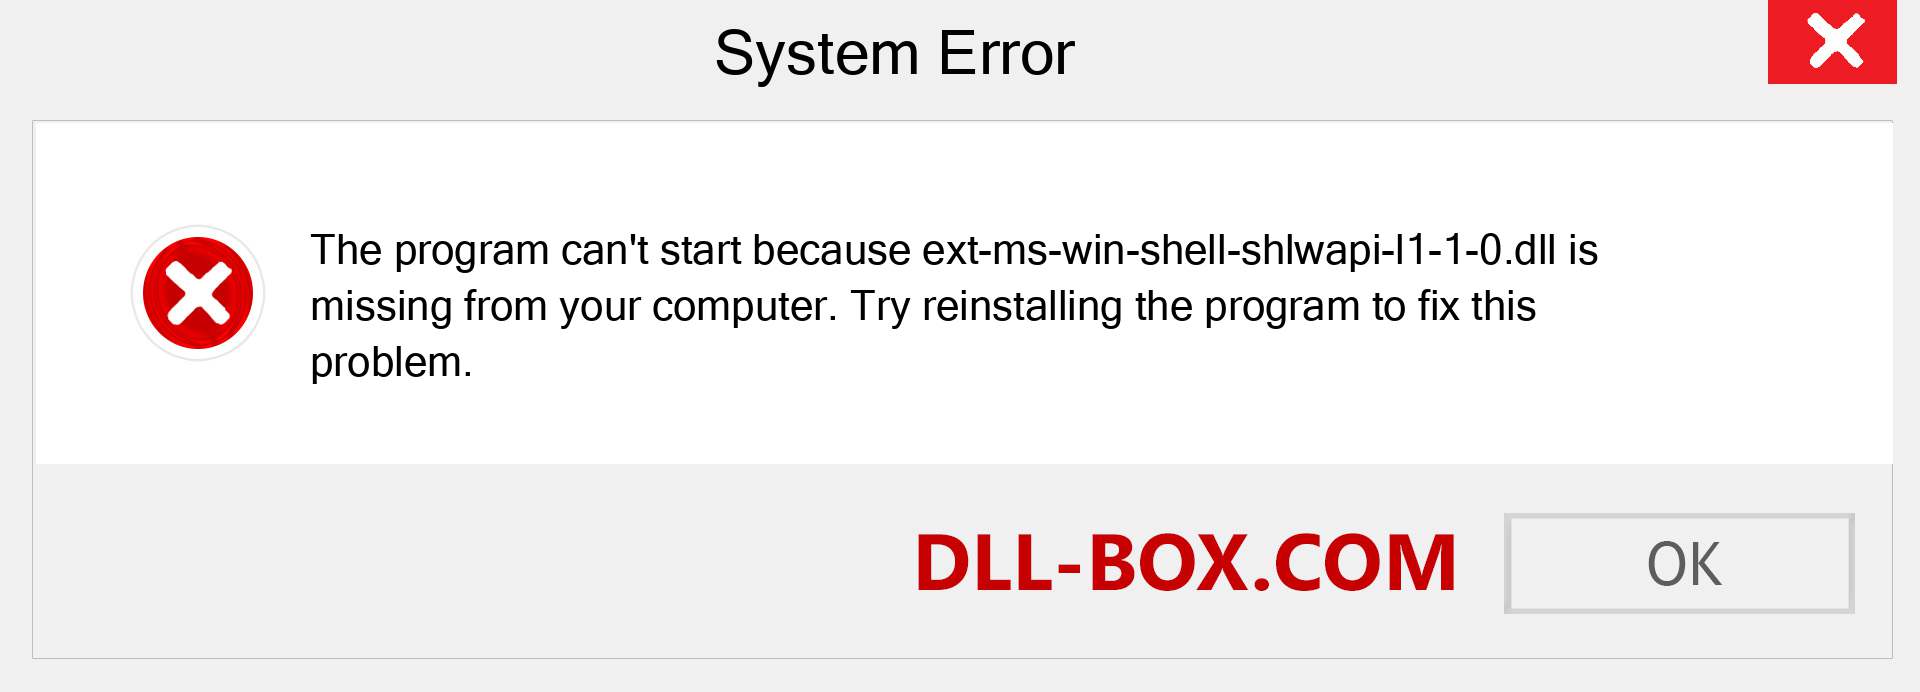  ext-ms-win-shell-shlwapi-l1-1-0.dll file is missing?. Download for Windows 7, 8, 10 - Fix  ext-ms-win-shell-shlwapi-l1-1-0 dll Missing Error on Windows, photos, images